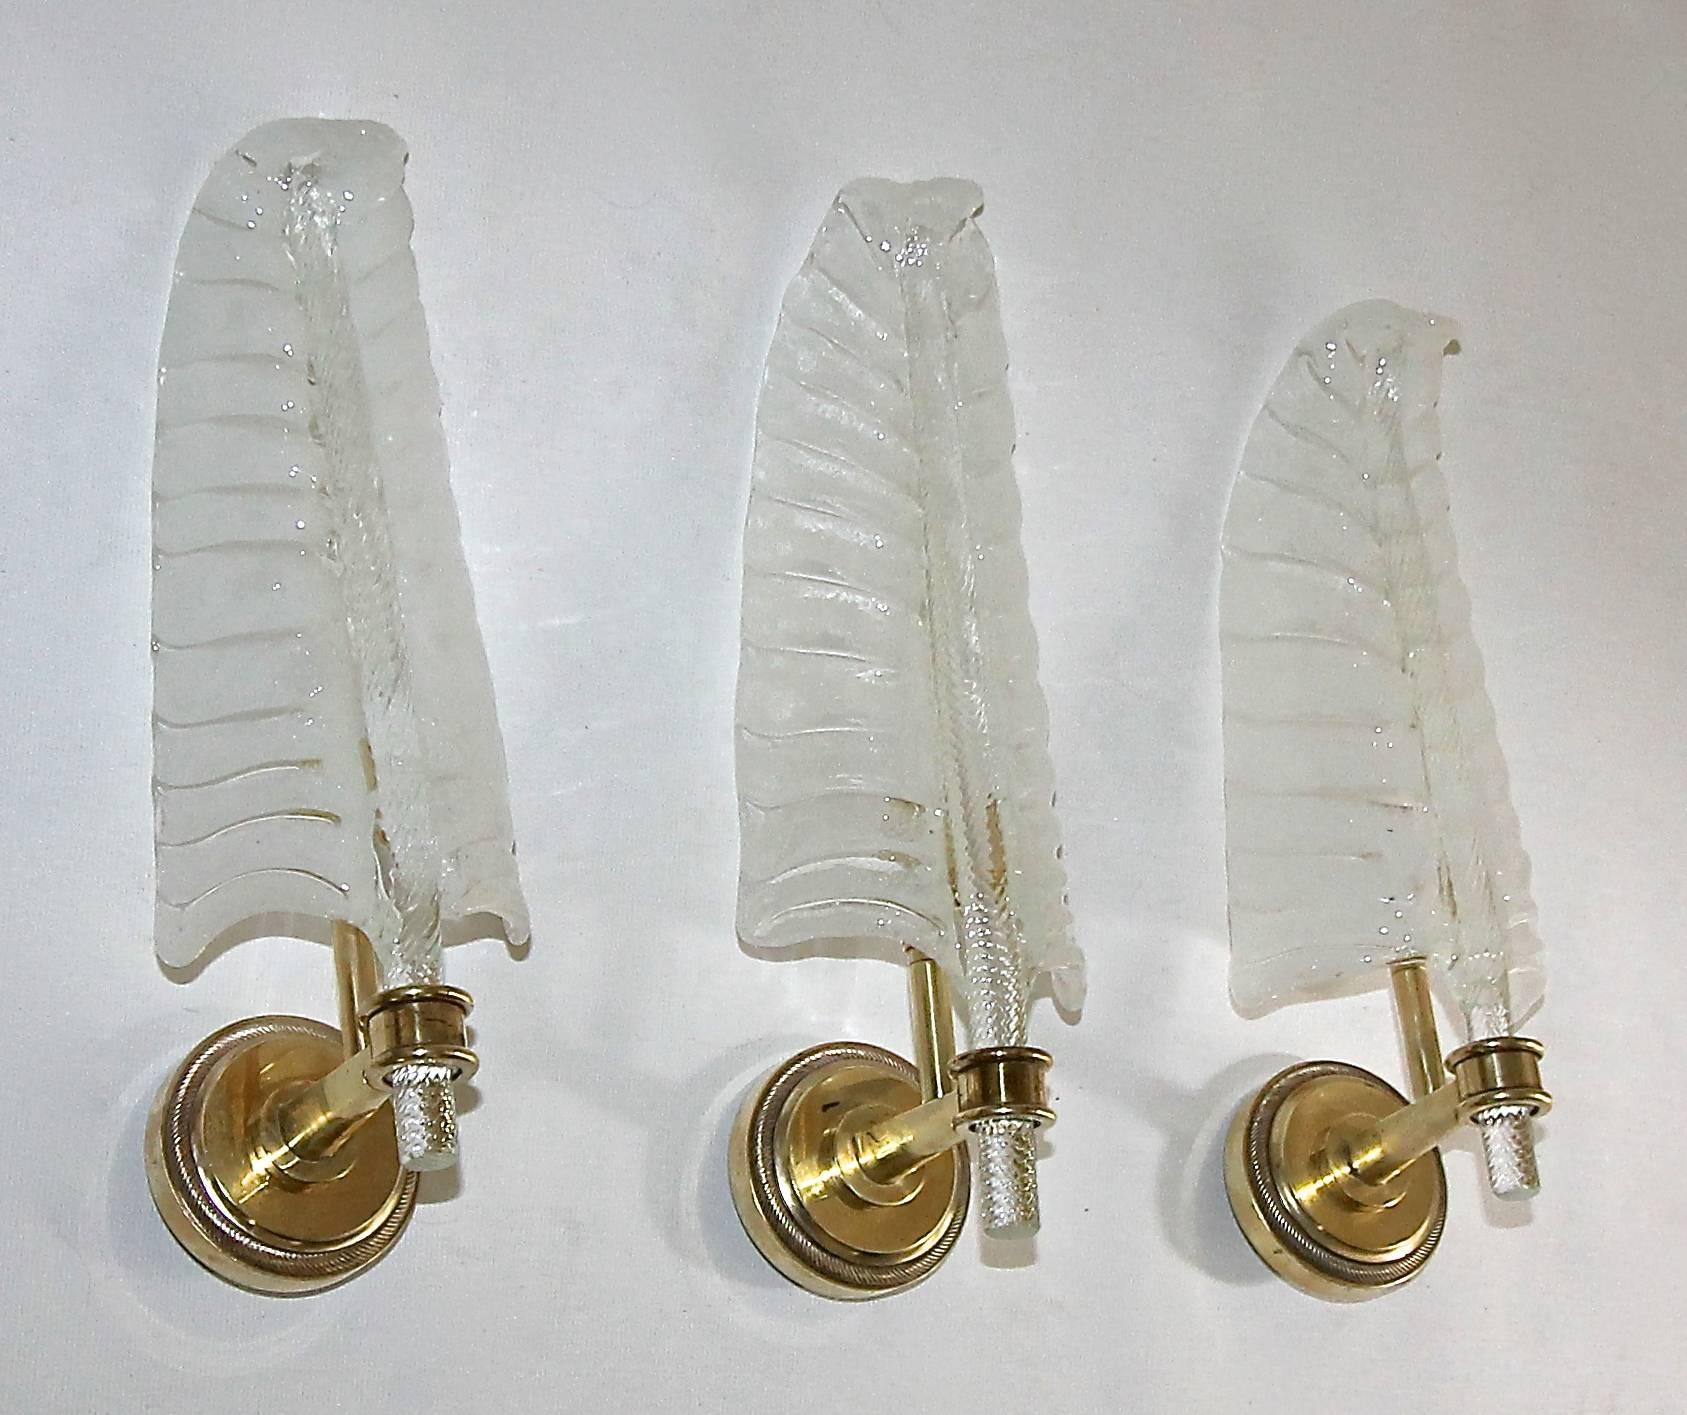 Set of three (3) Barovier handblown Italian glass leaf or plume shaped wall sconces. The glass is carefully crafted using the 